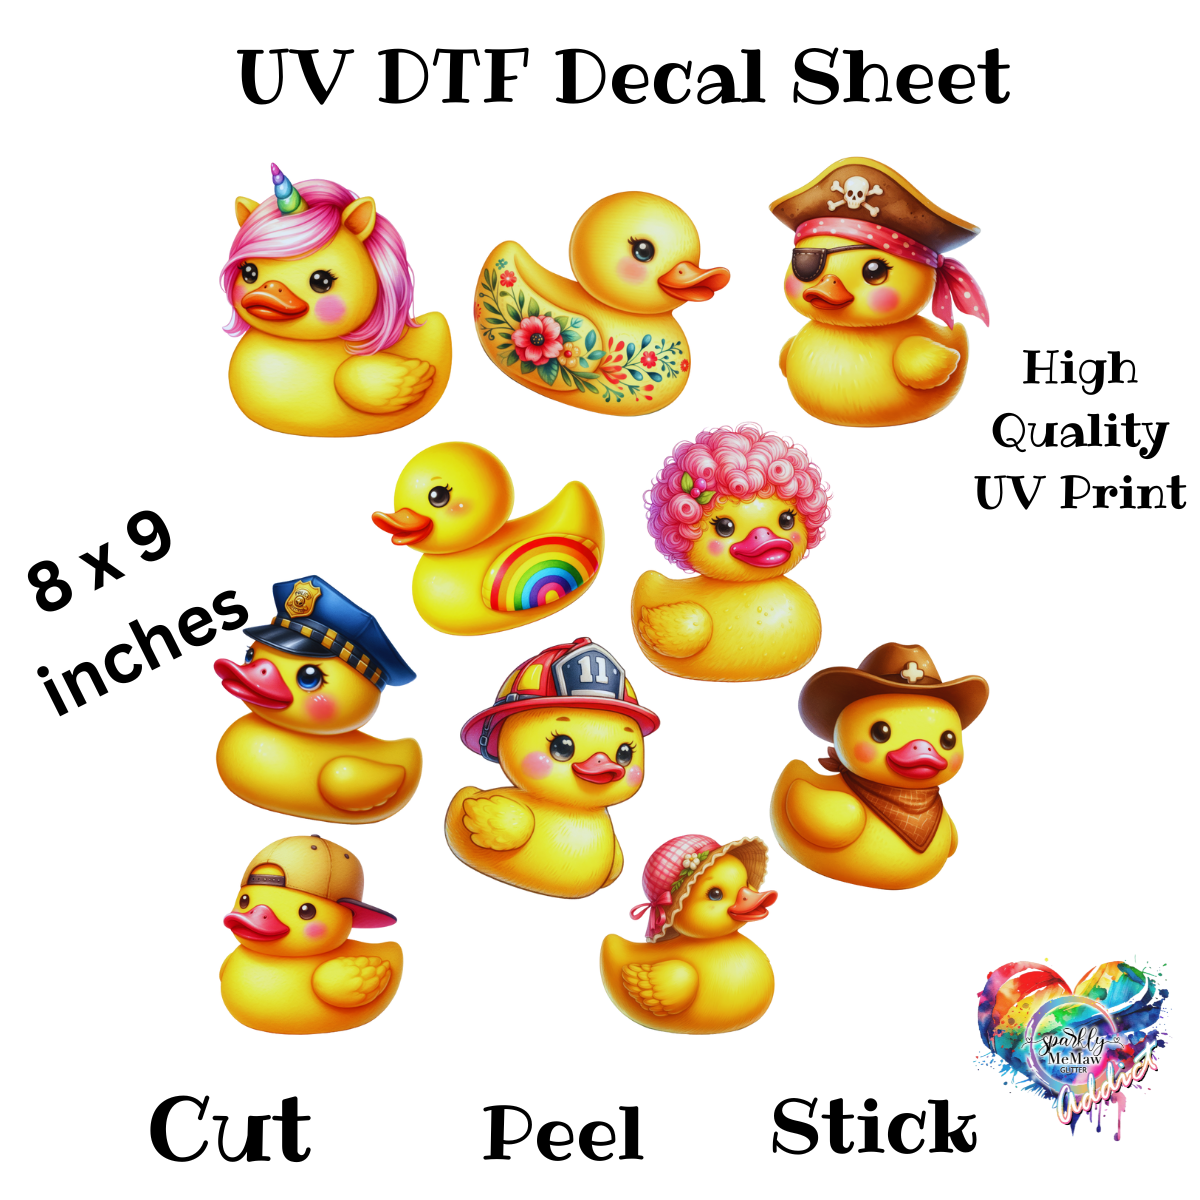 Rubber Duckies UV DTF Decal Sheet